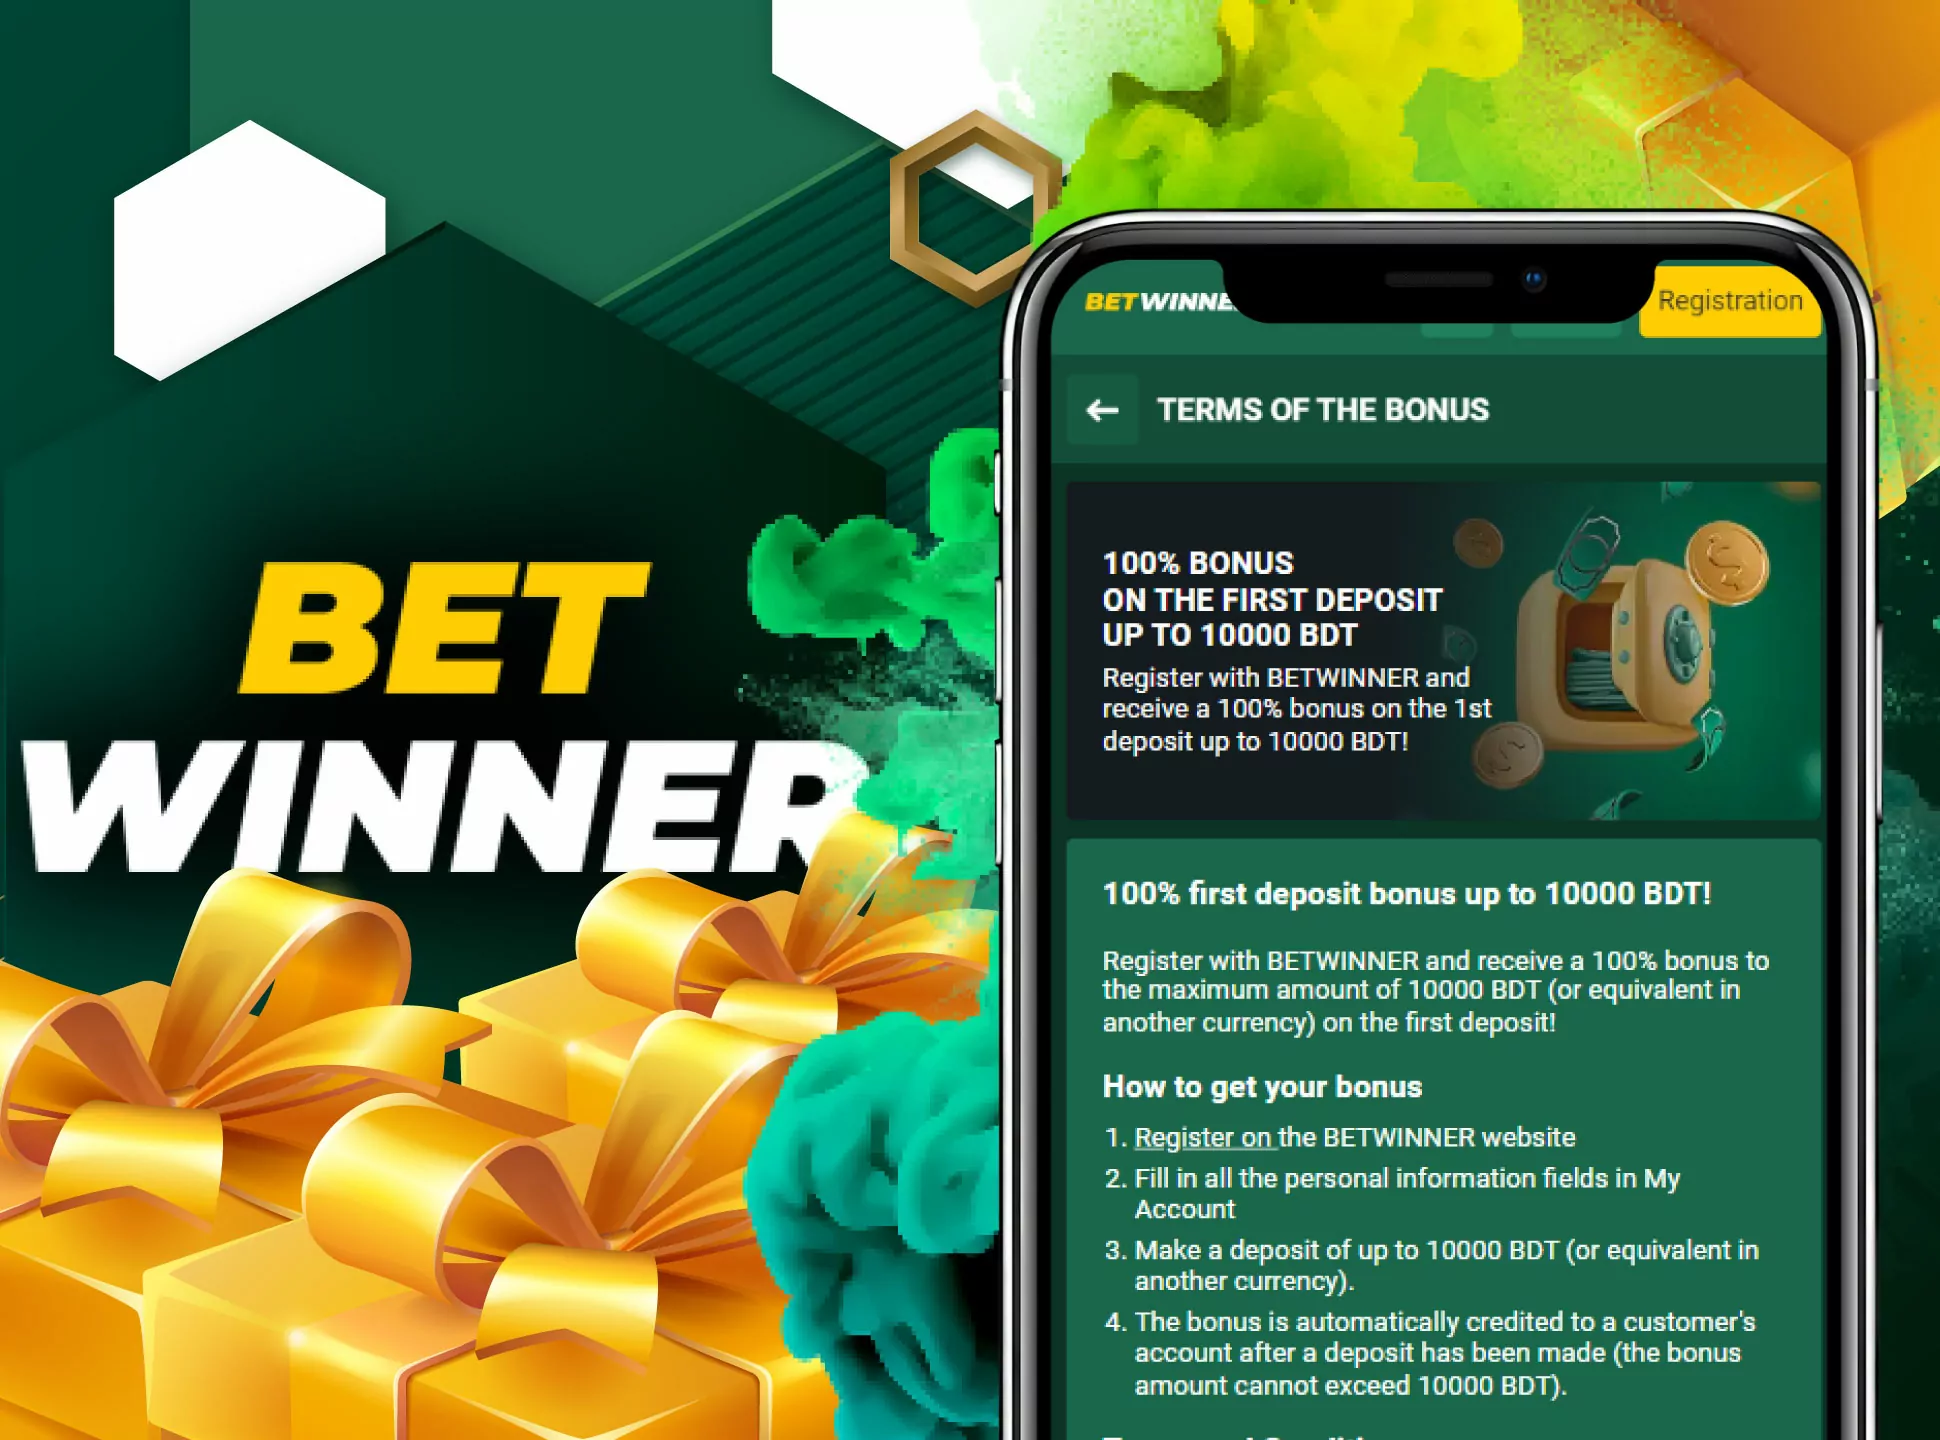 Get you welcome bonuses after first deposit at Betwinner.